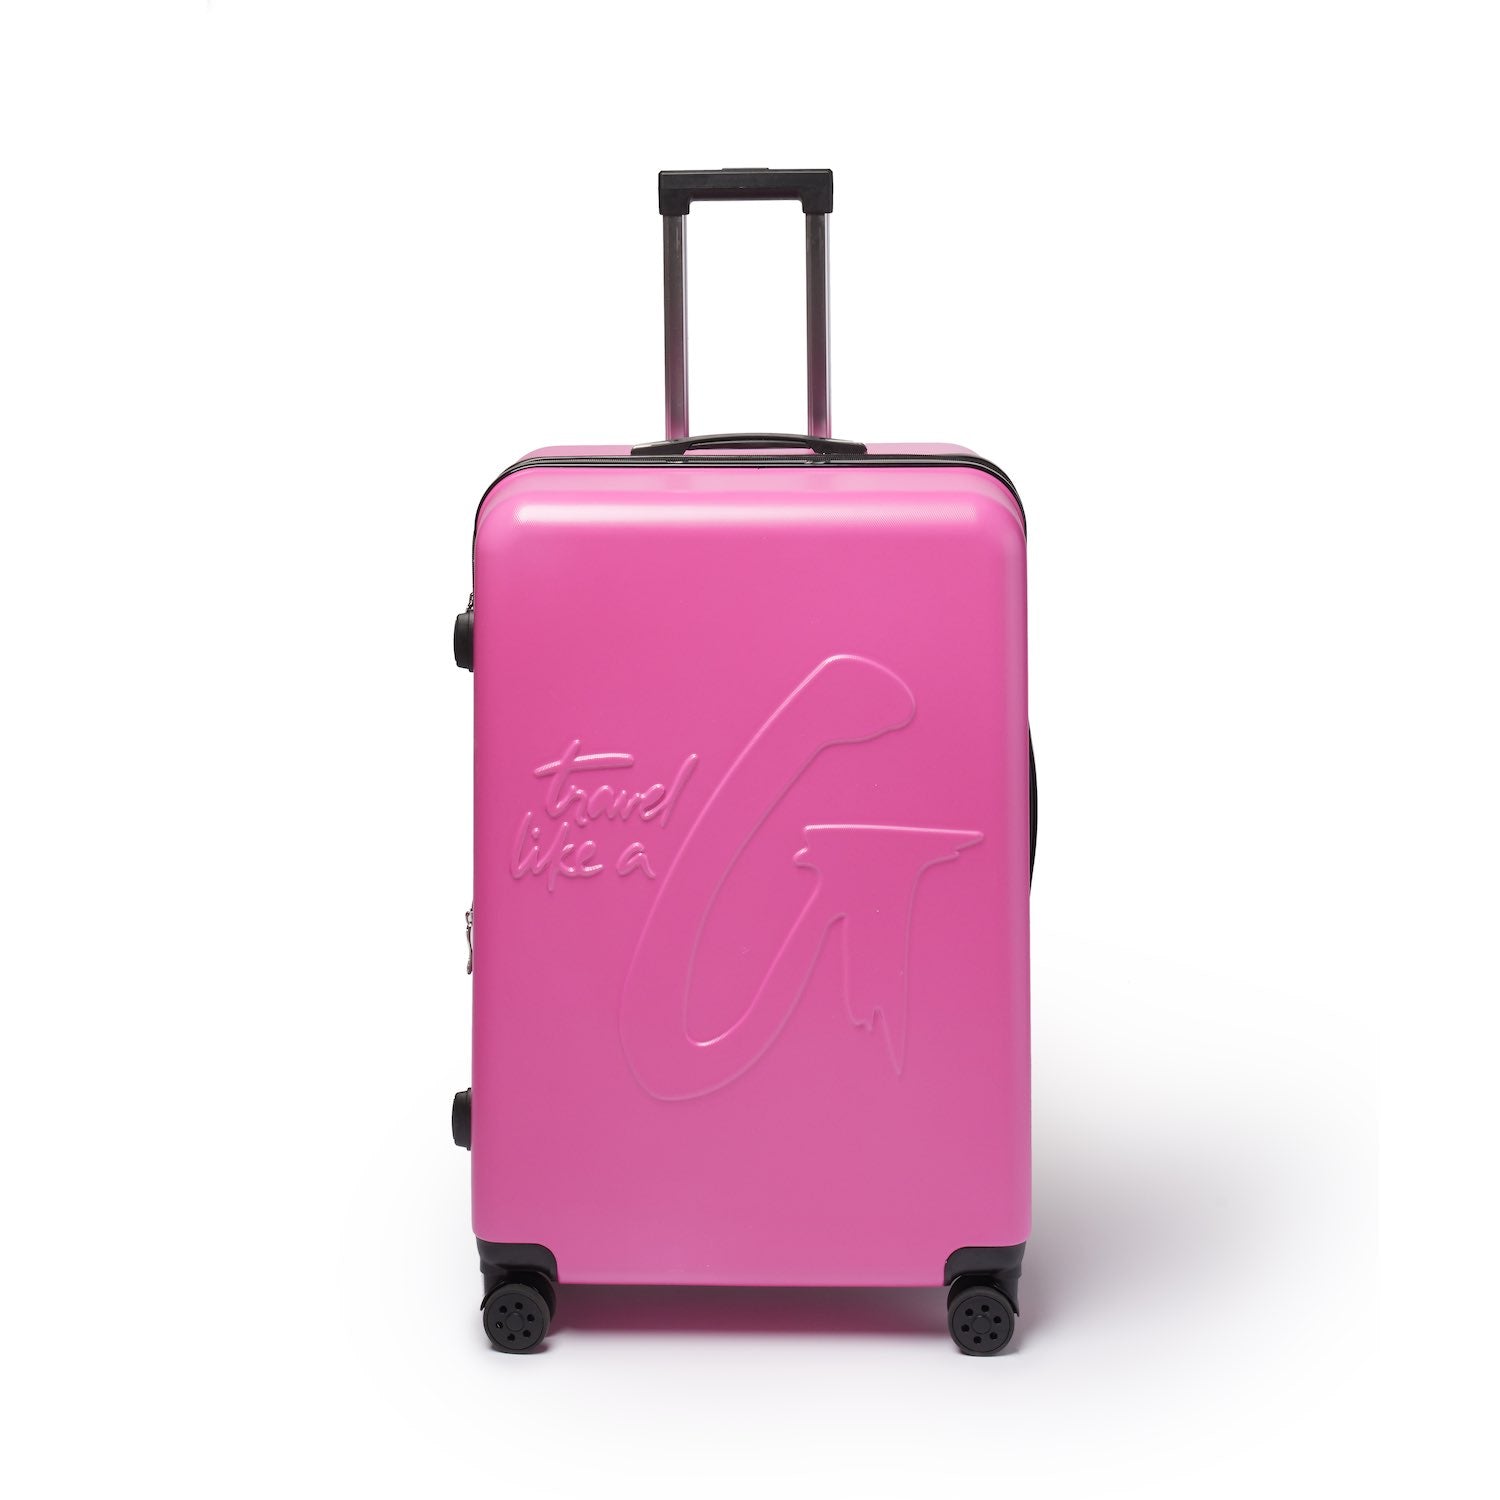 4PC LUGGAGE COLLECTION HOT PINK